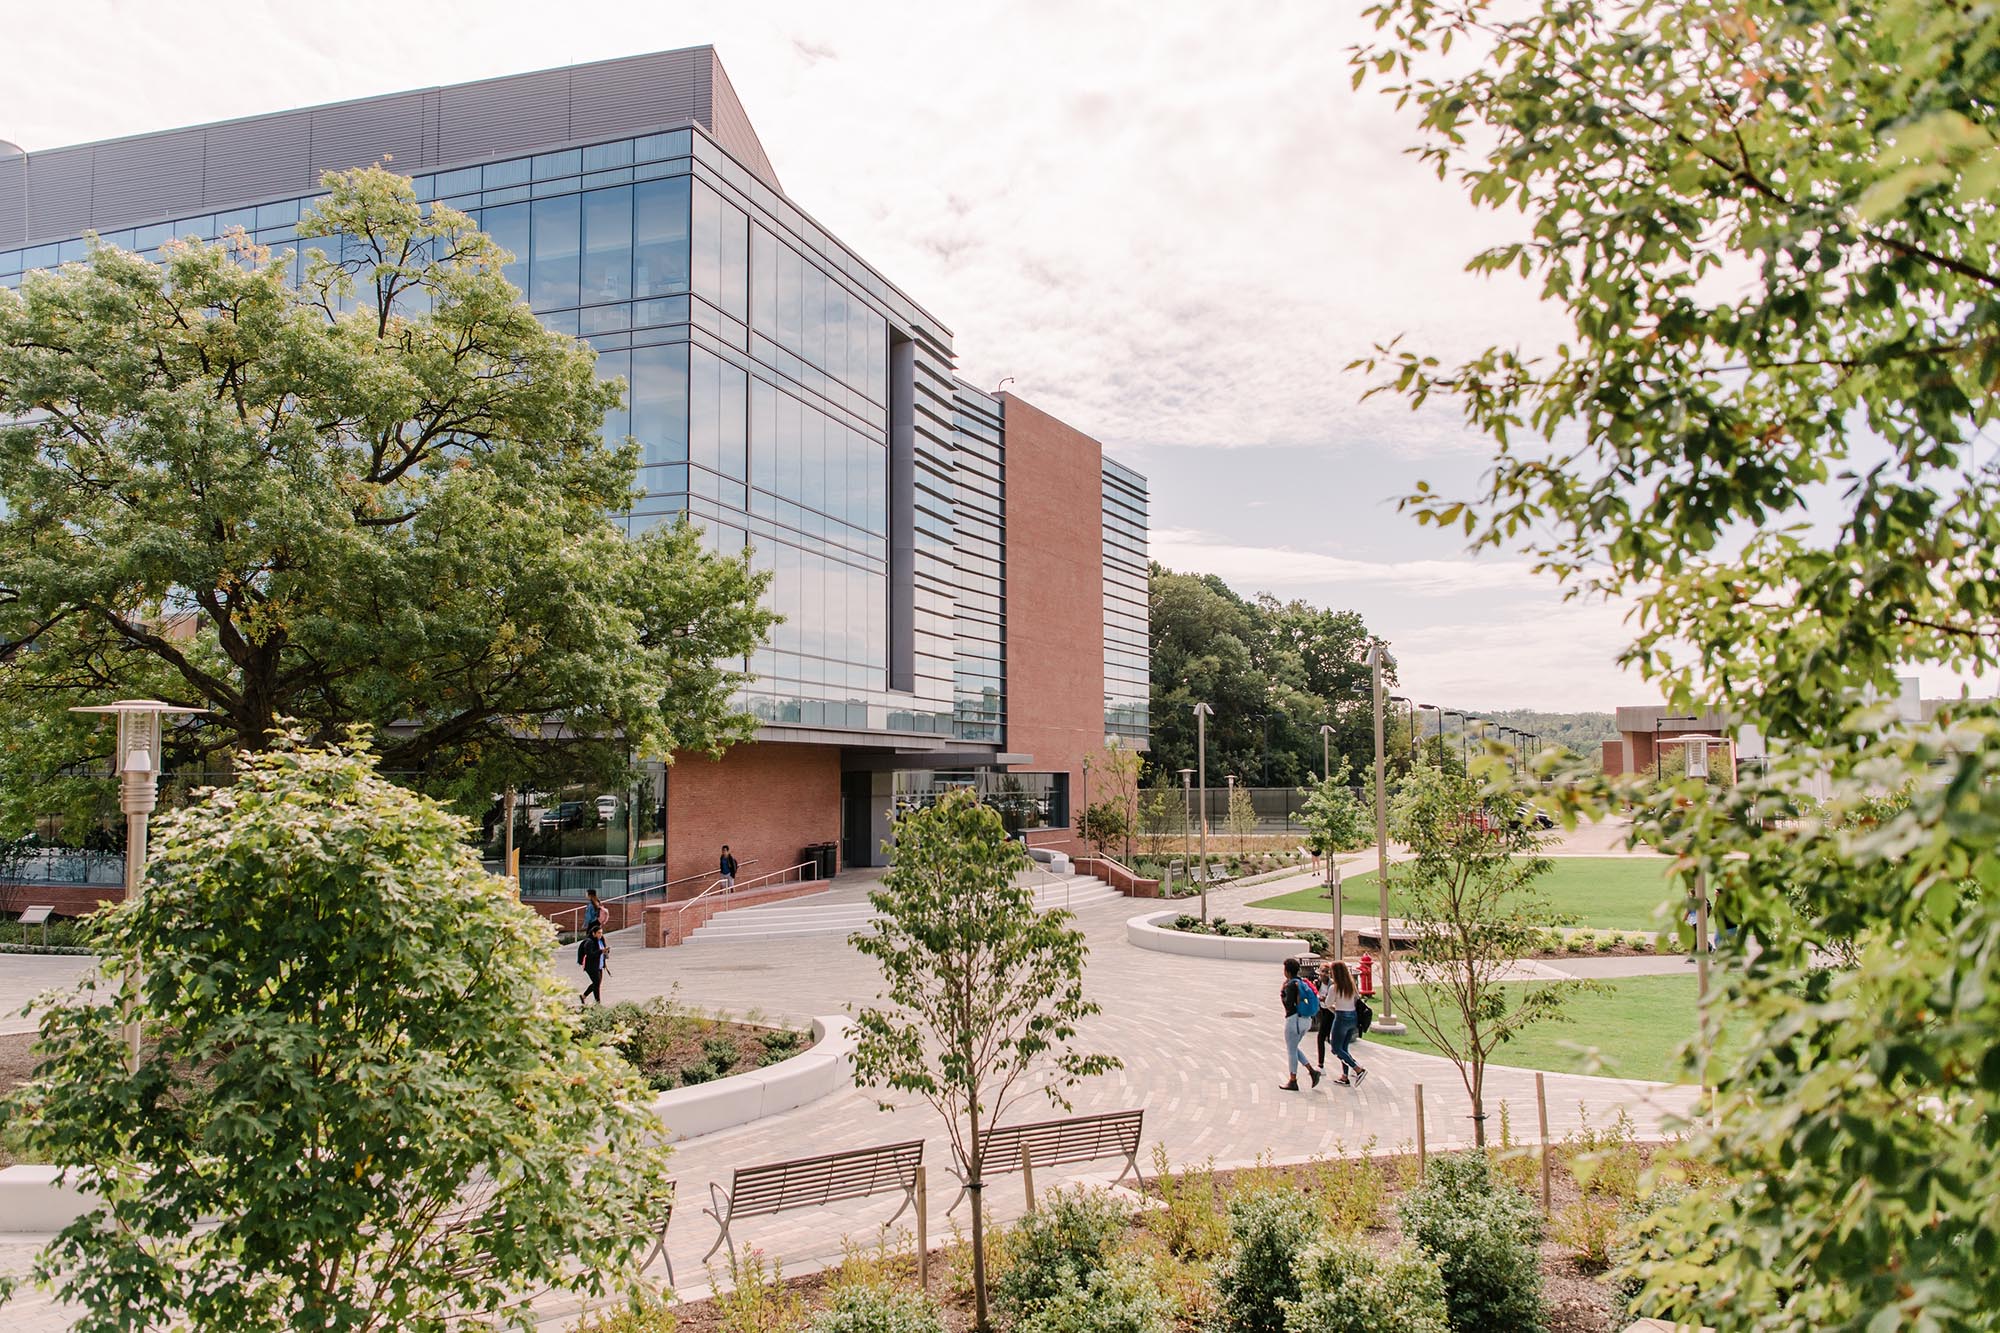 UMBC's campus becomes green in the Spring season. Students enjoy the trees and fresh air while walking past a unique brick building with large glass windows.